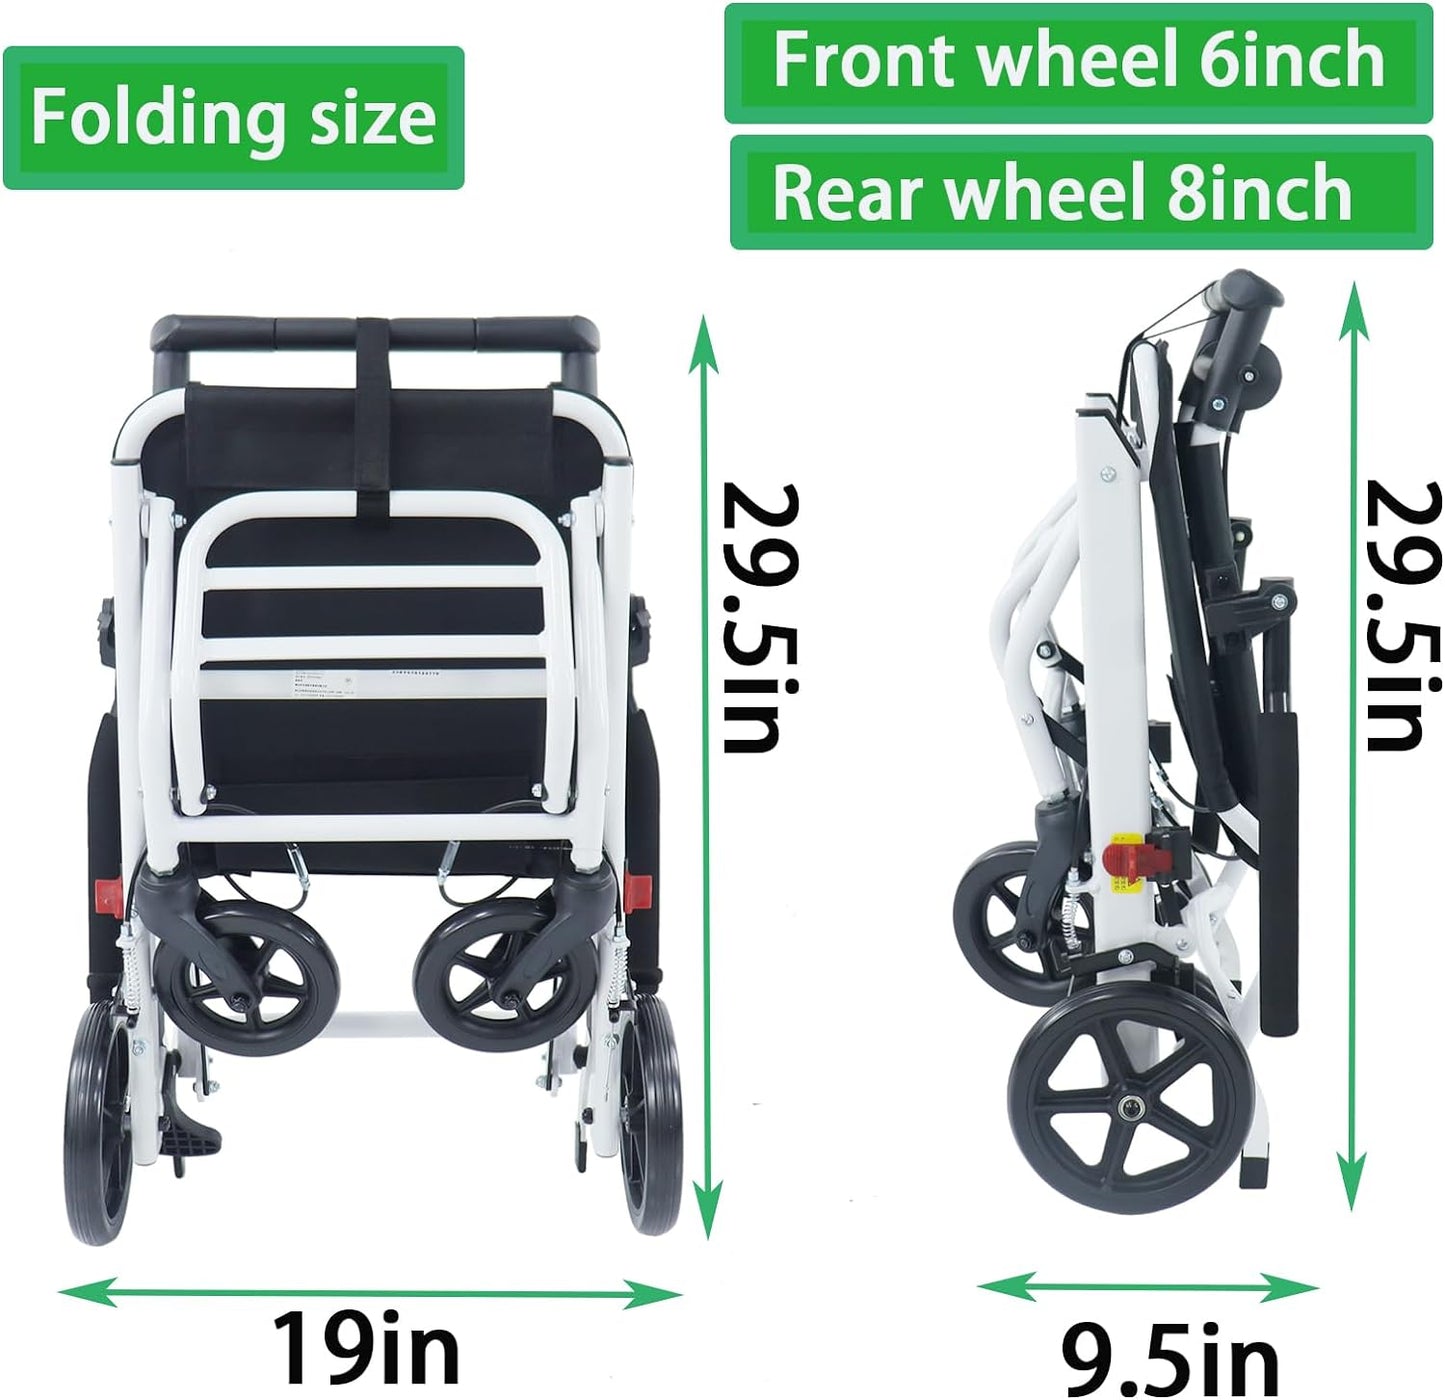 UU-ZHANG
4.11 297(only 15lb) Super Lightweight Transport Wheelchair. Easy to Travel, Locking Hand Brakes, User-Friendly, Folding, Portable. for Adults or Child (up to 220lbs)) - Selzalot